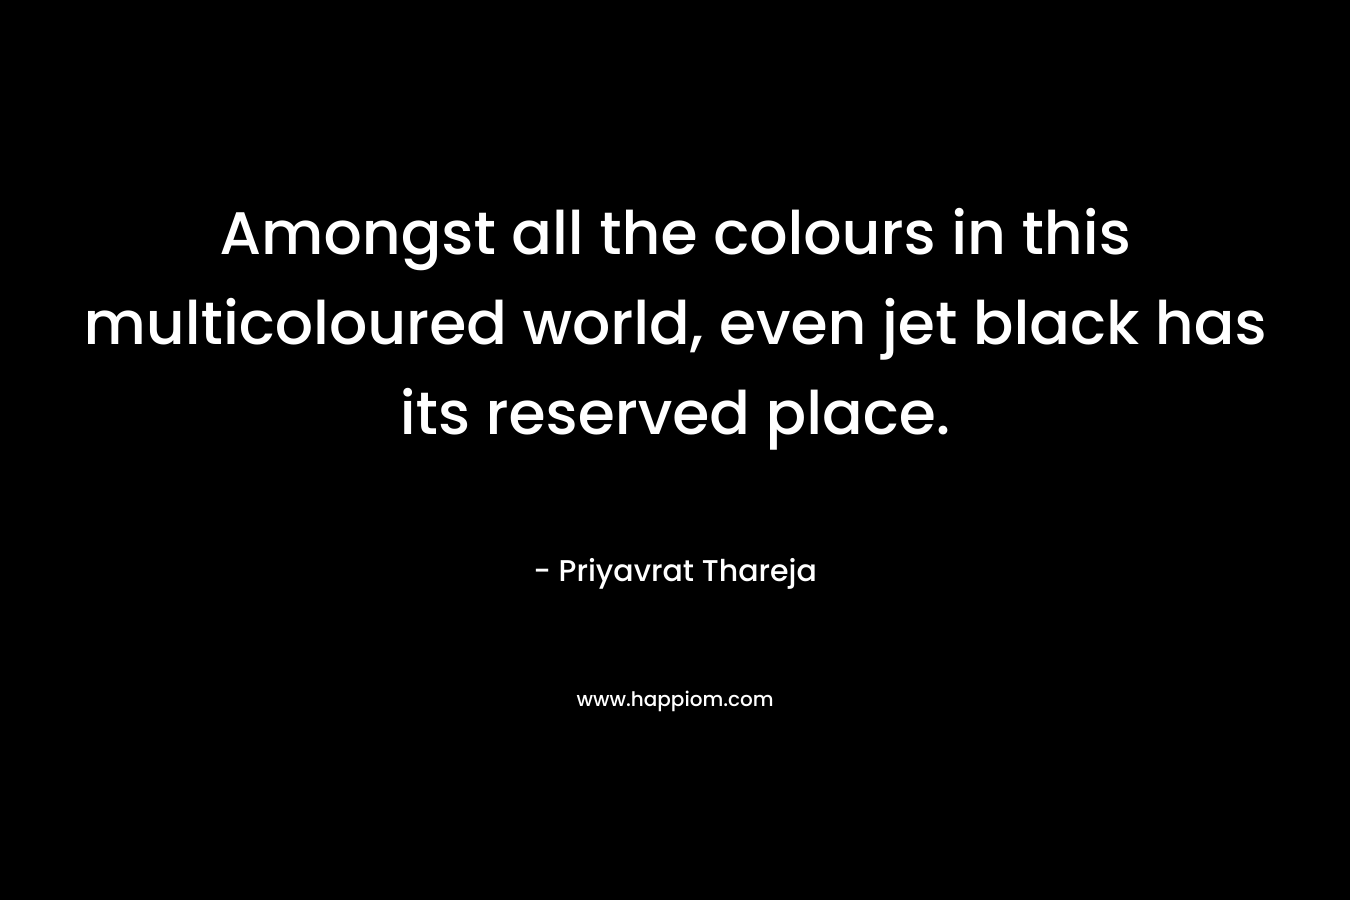 Amongst all the colours in this multicoloured world, even jet black has its reserved place. – Priyavrat Thareja